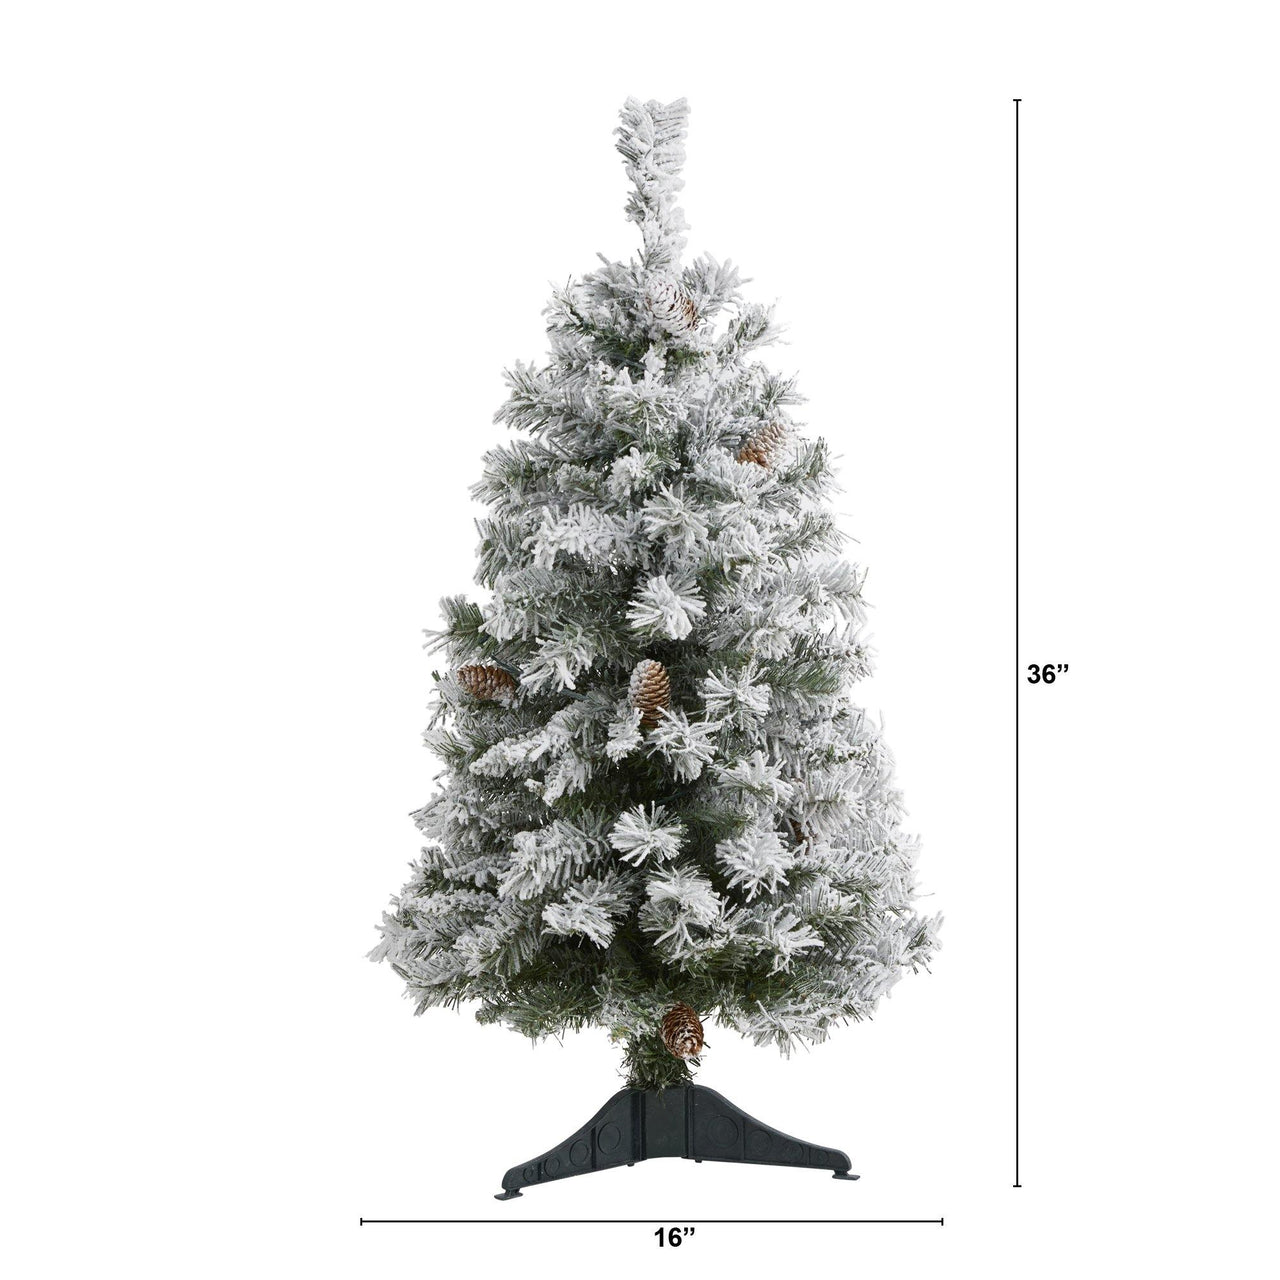 3' Flocked White River Mountain Pine Artificial Christmas Tree with Pinecones - The Fox Decor